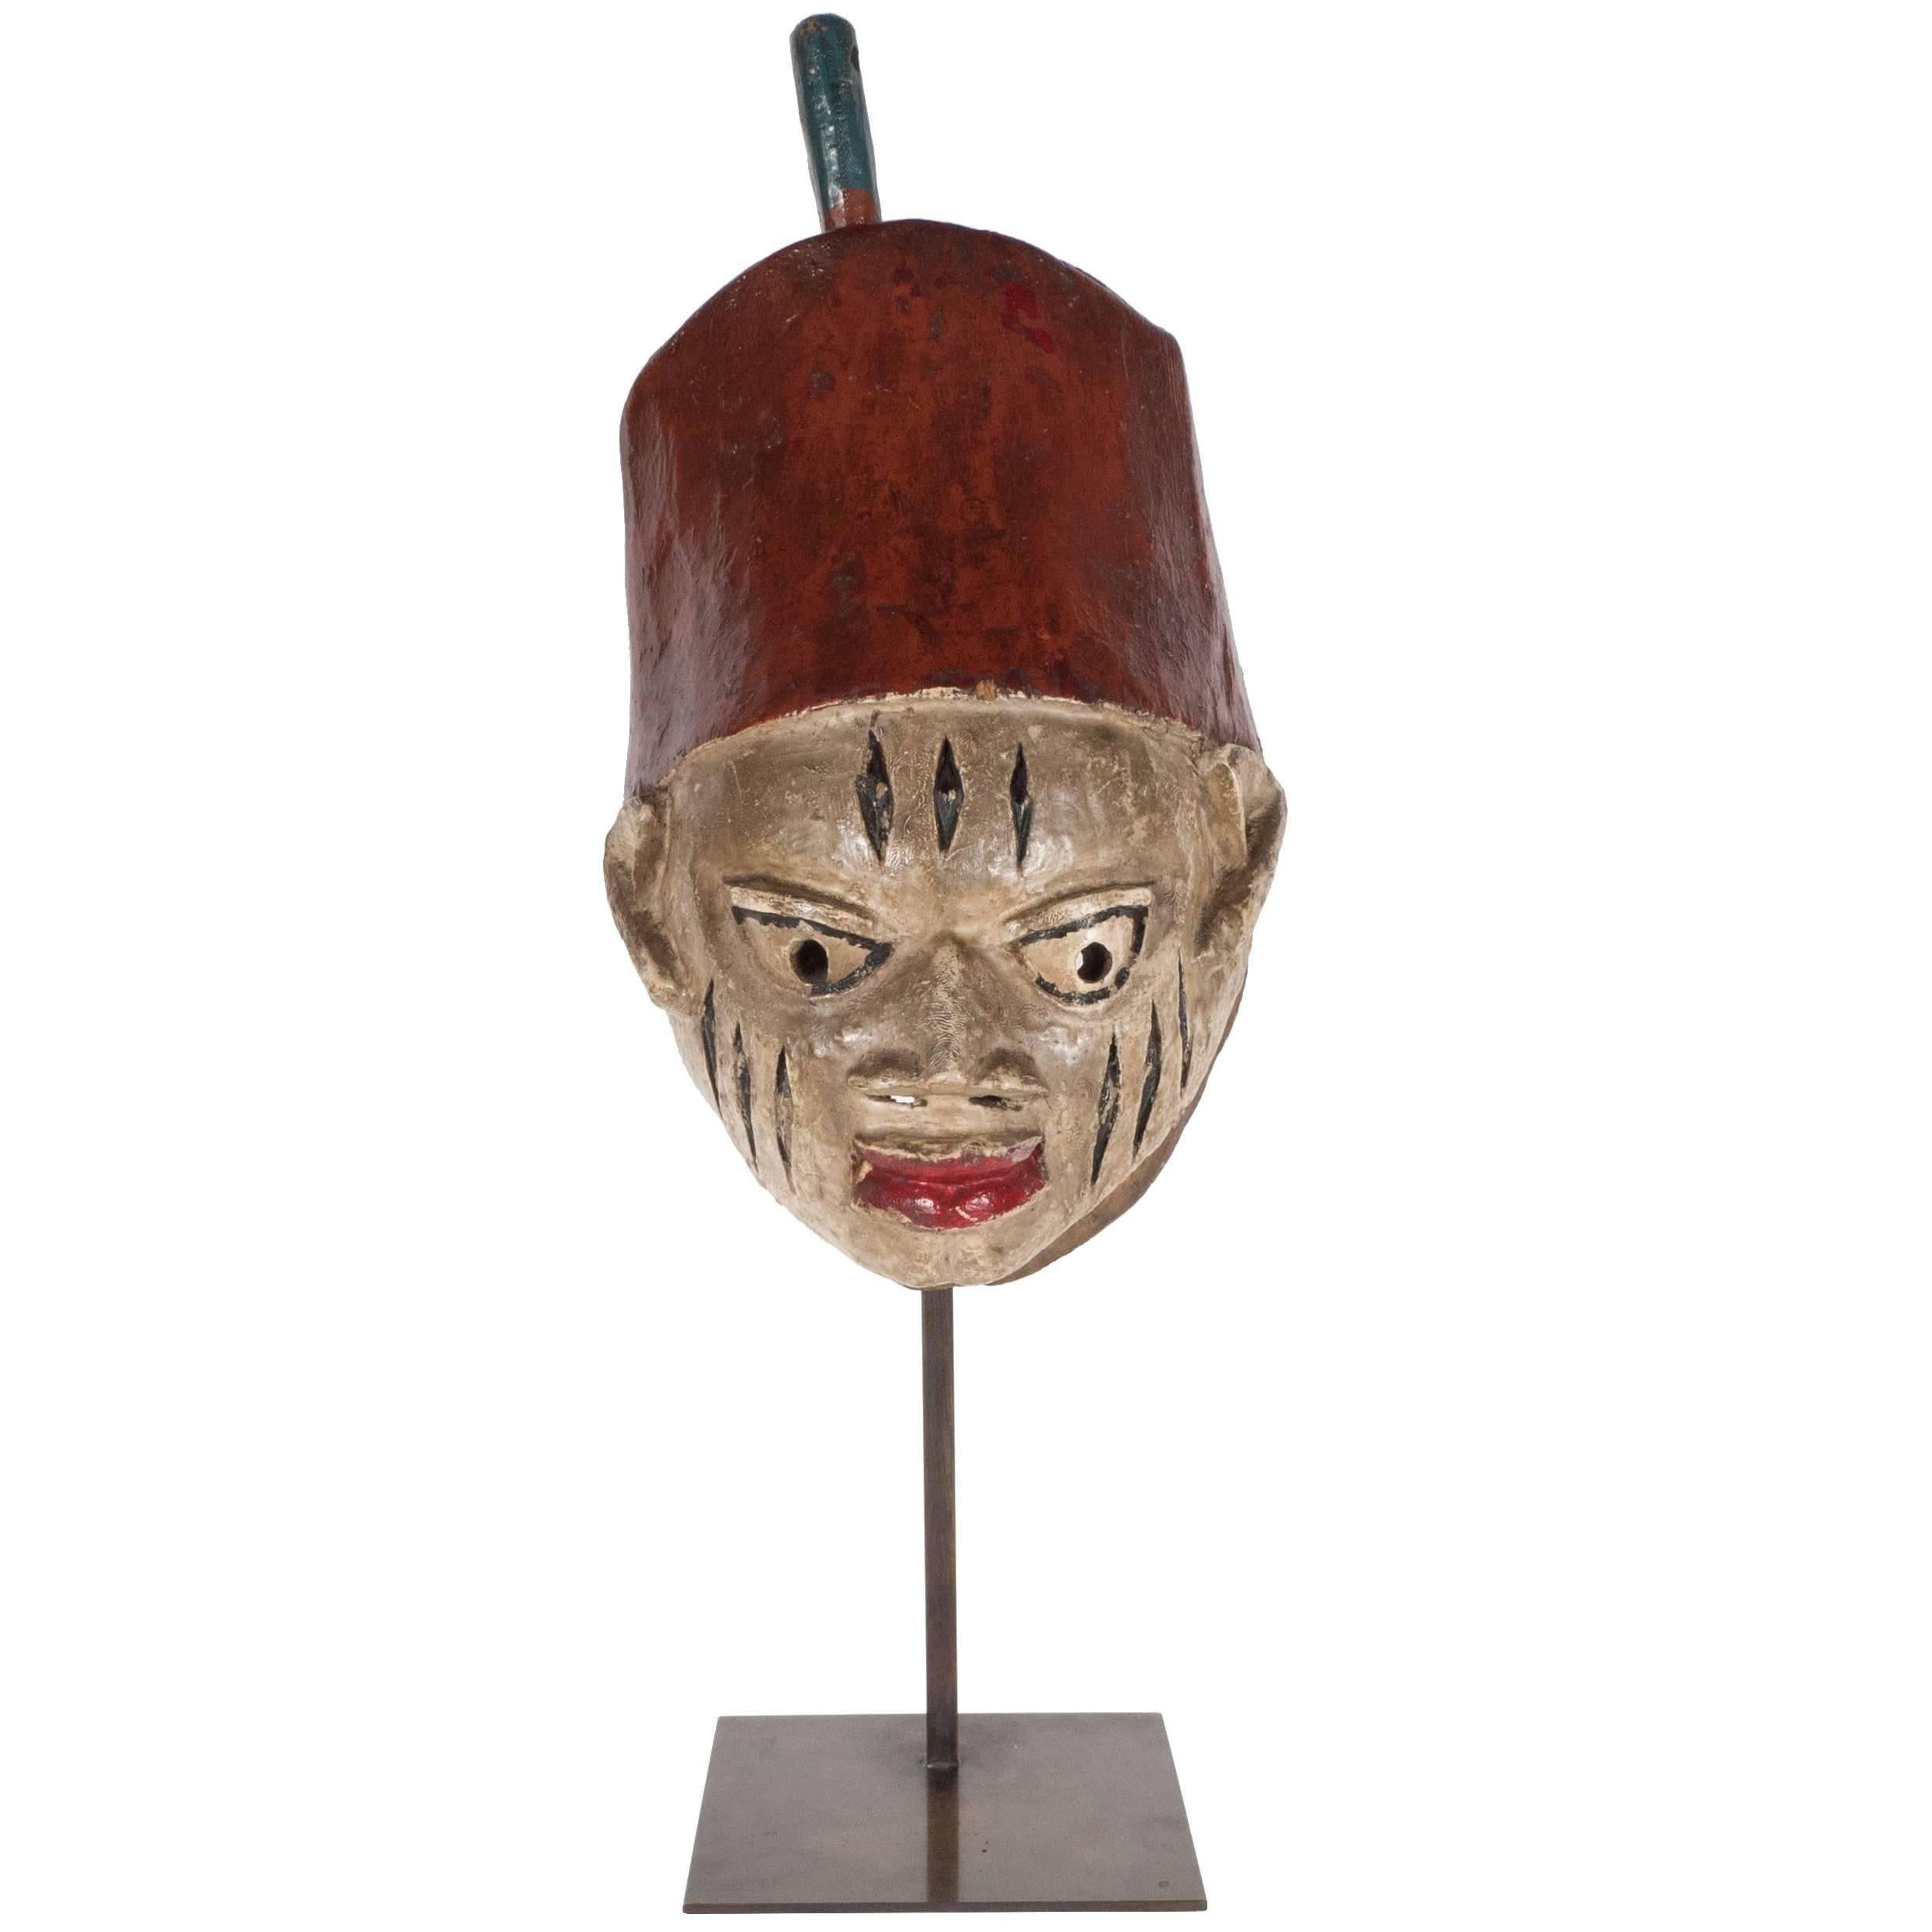 Unknown Figurative Sculpture - Painted Head Crest Mask on Mount, Probably Yoruba, Nigeria, 20th Century